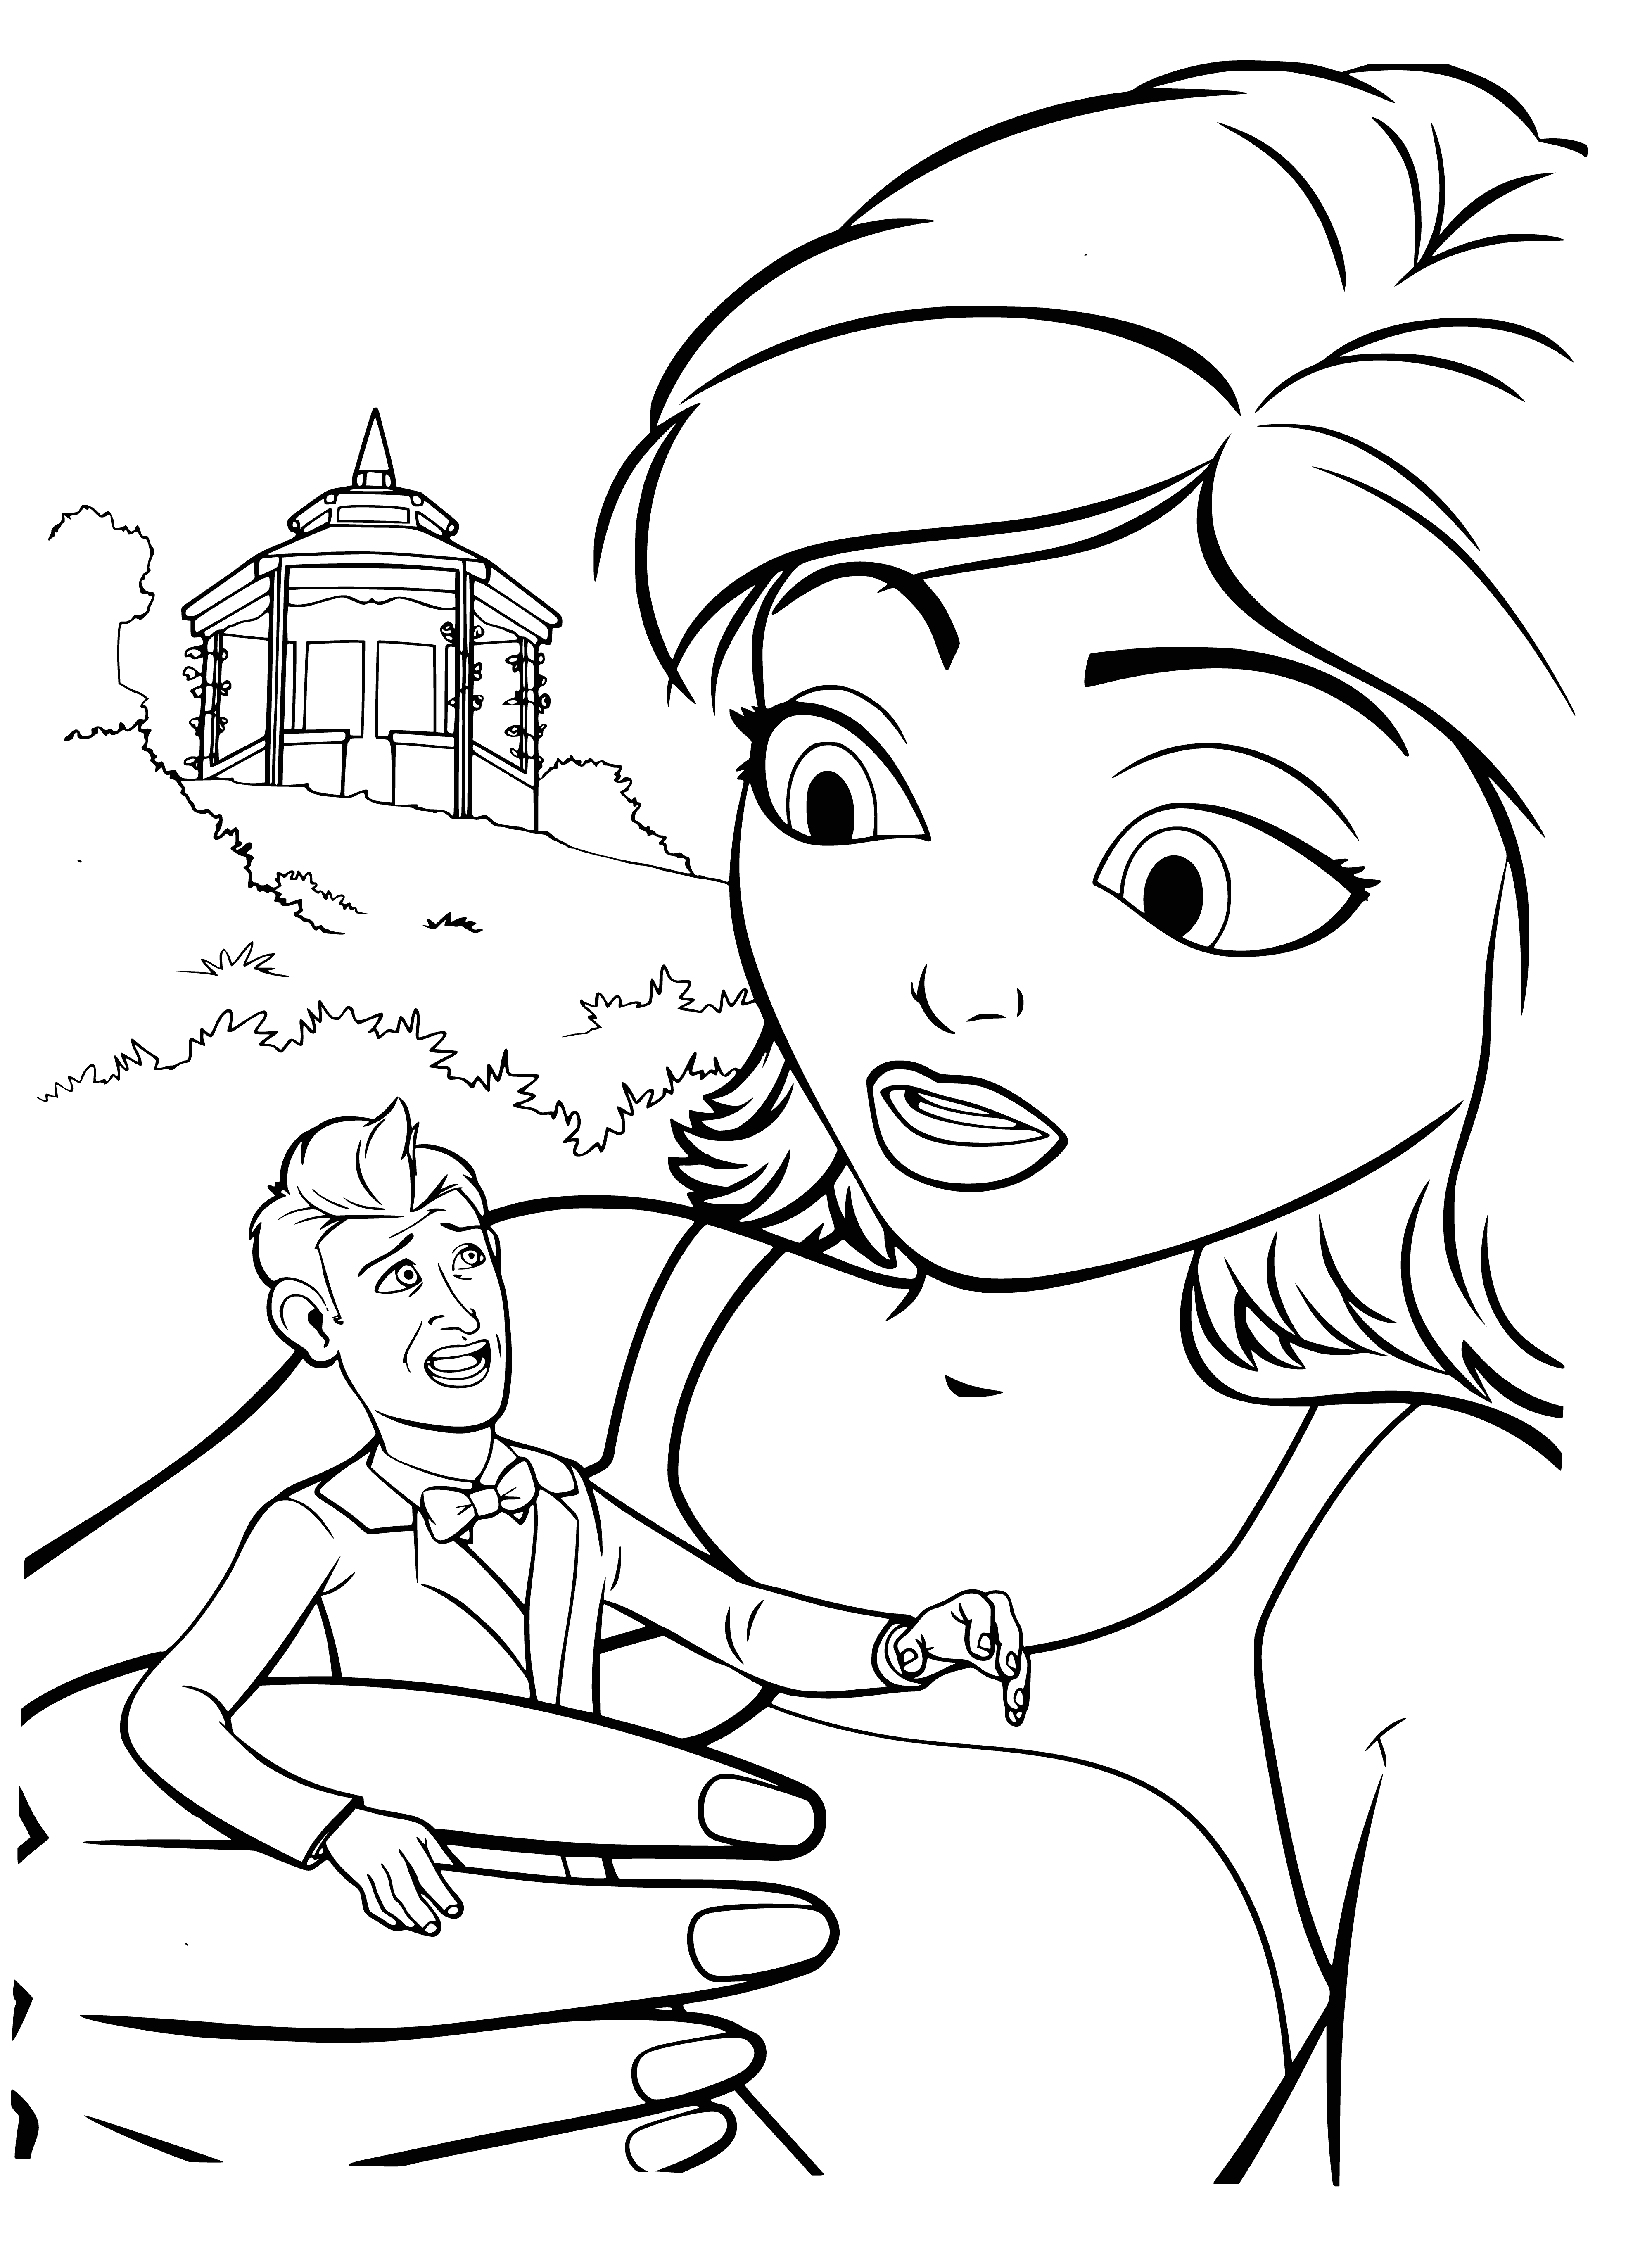 coloring page: Girl, 15 yrs, short brown hair, green eyes, wearing white shirt, blue jacket, jeans, & glasses.